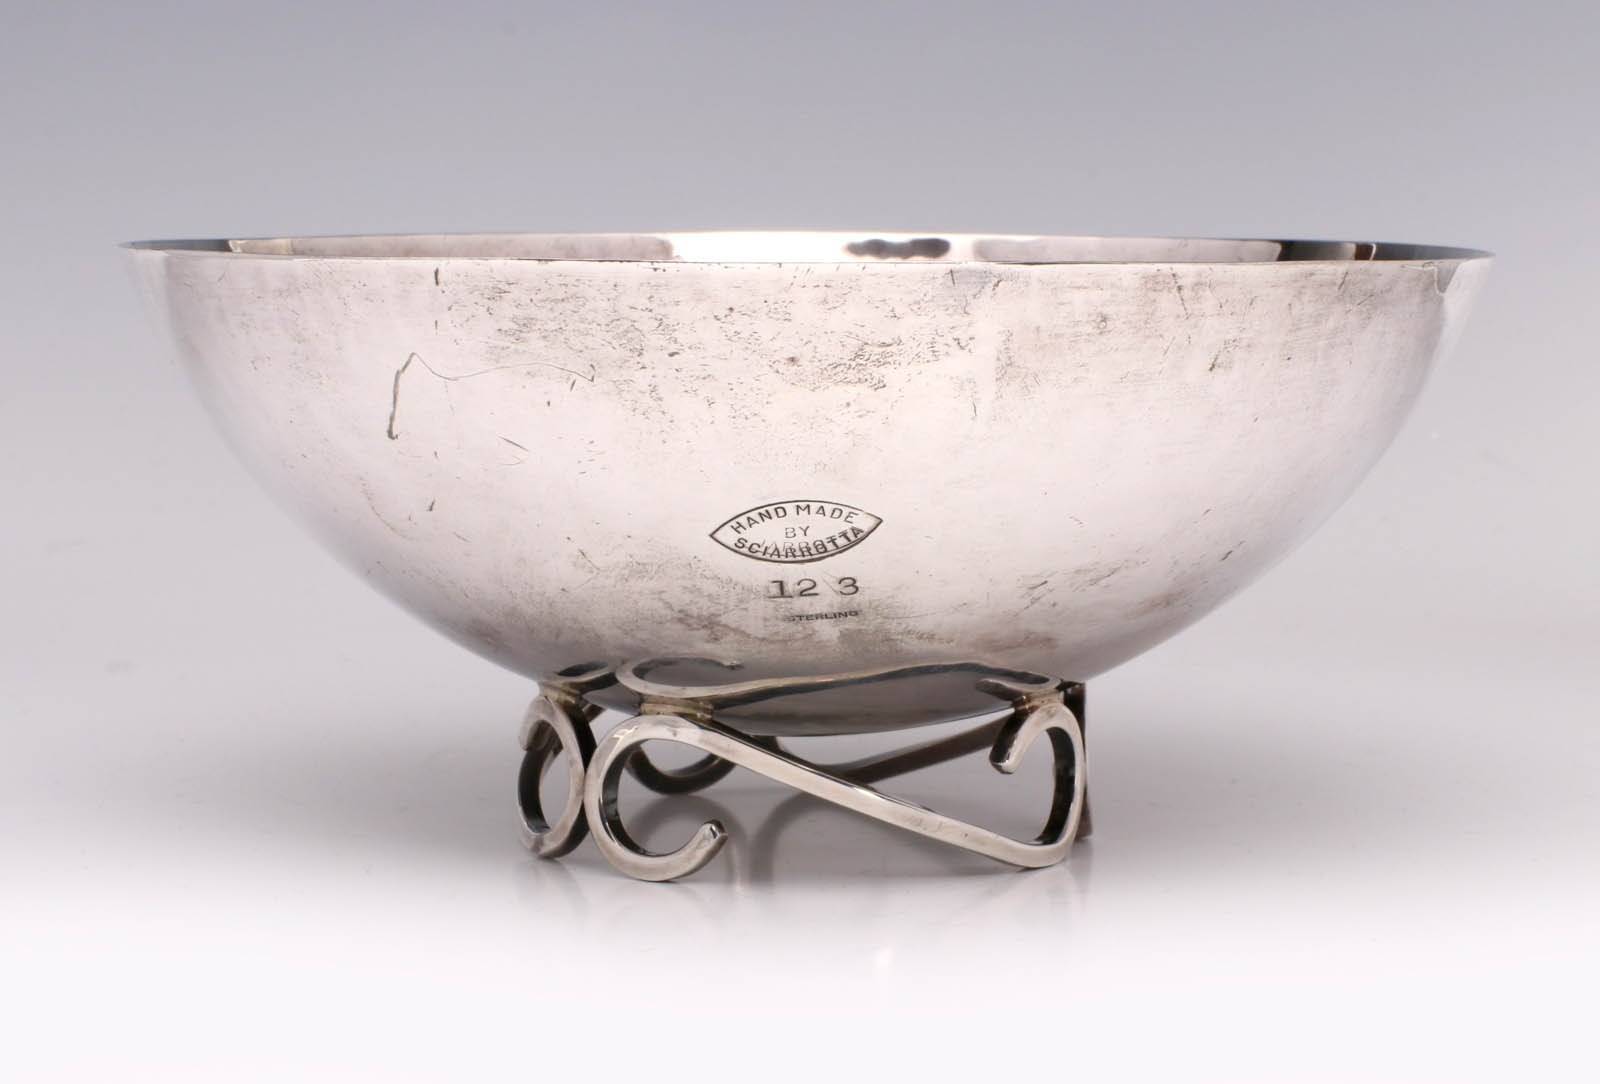 A HAND WROUGHT STERLING BOWL SIGNED SCIARROTTA